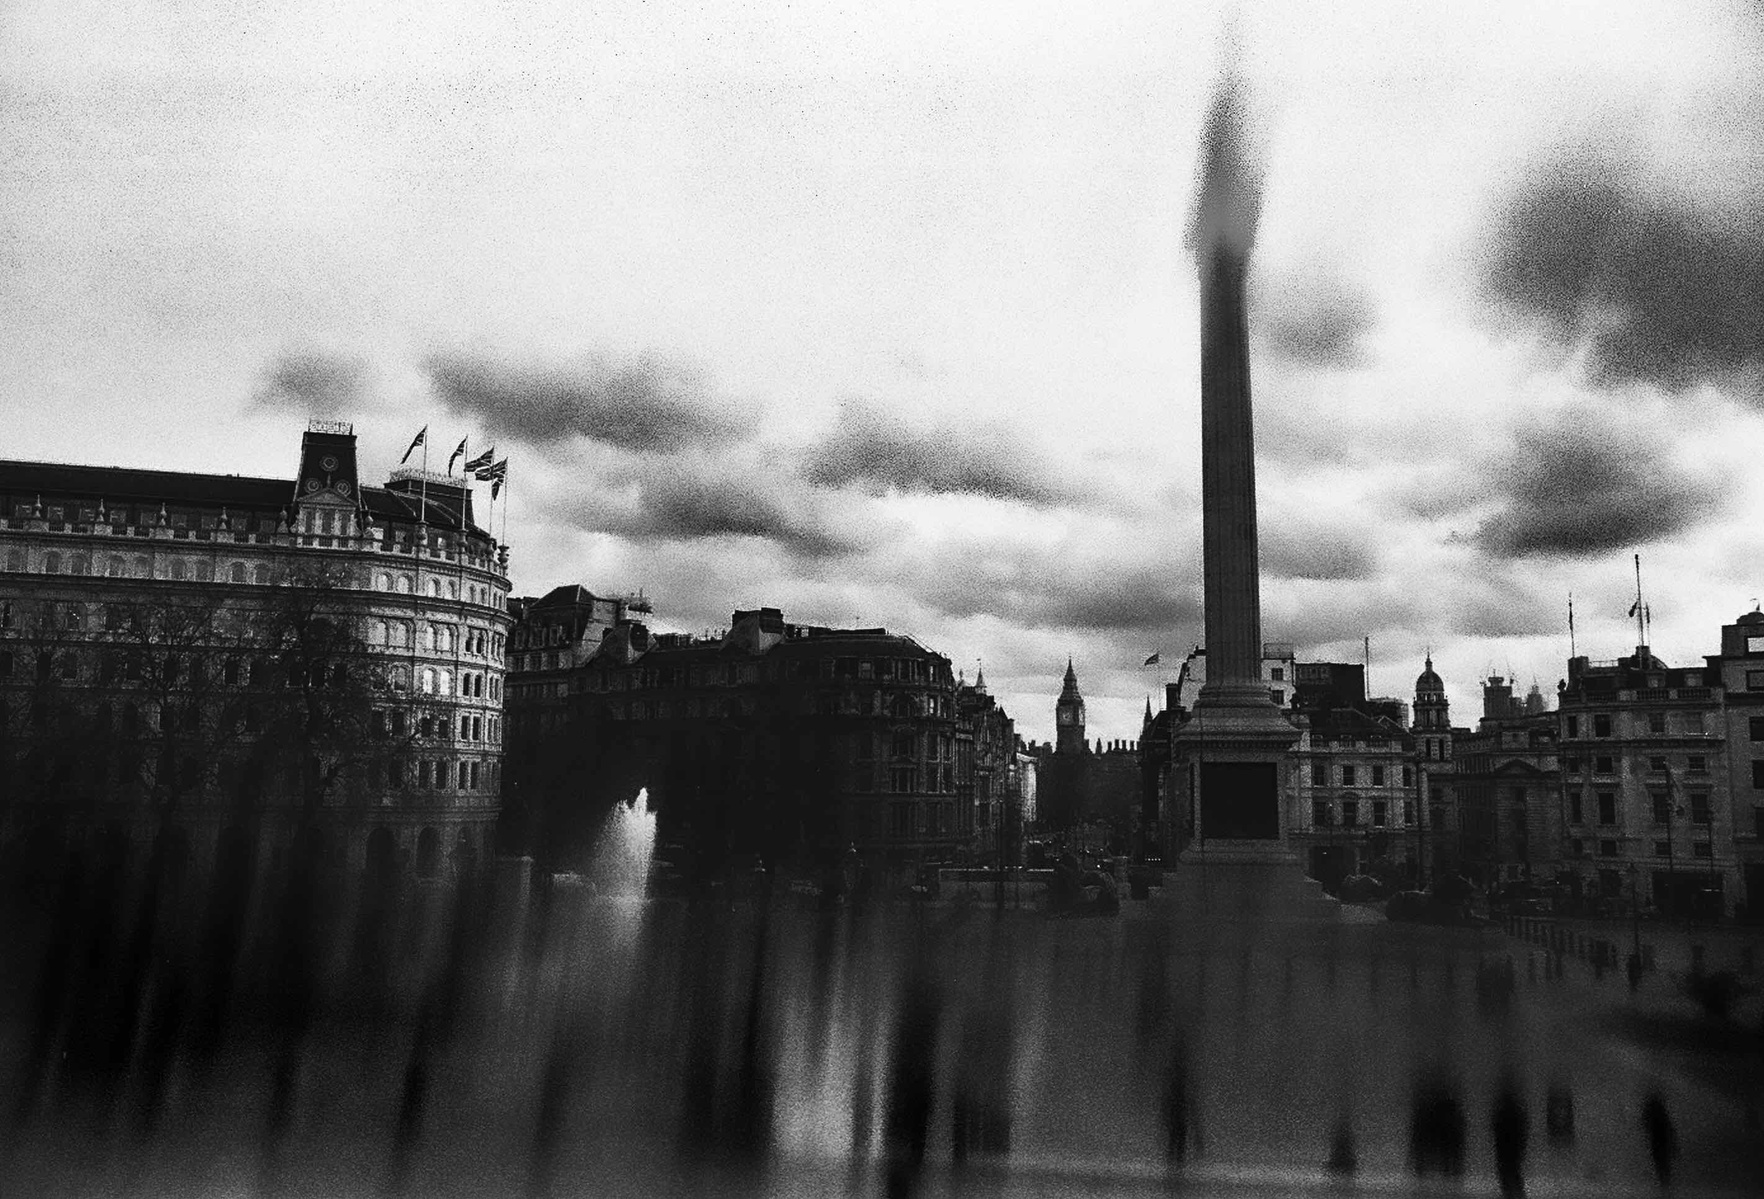 Black and white image taken from the national portrait gallery of a cloudy day at trafalgar square with nelson's column in the middle. 